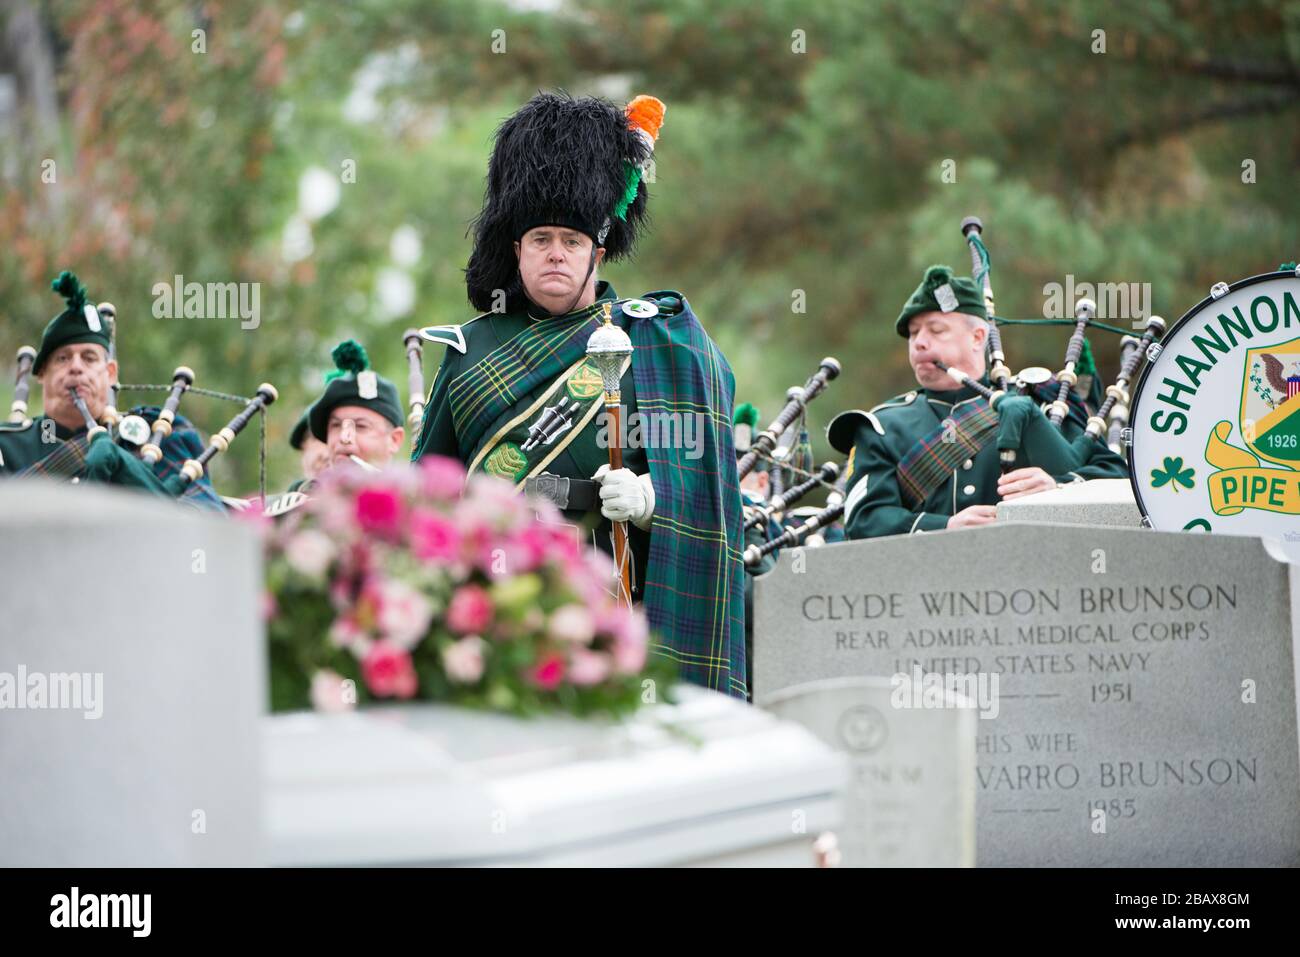 'Members of The Shannon Rovers participate in the graveside service for Maureen Fitzsimons Blair, also known as Maureen O’Hara, in Section 2 of Arlington National Cemetery, Nov. 9, 2015. She is being buried with her husband U.S. Air Force Brig. Gen. Charles F. Blair Jr.; 9 November 2015, 14:39; Graveside service of Maureen Fitzsimons Blair, also known as Maureen O’Hara, in Arlington National Cemetery; Arlington National Cemetery; ' Stock Photo